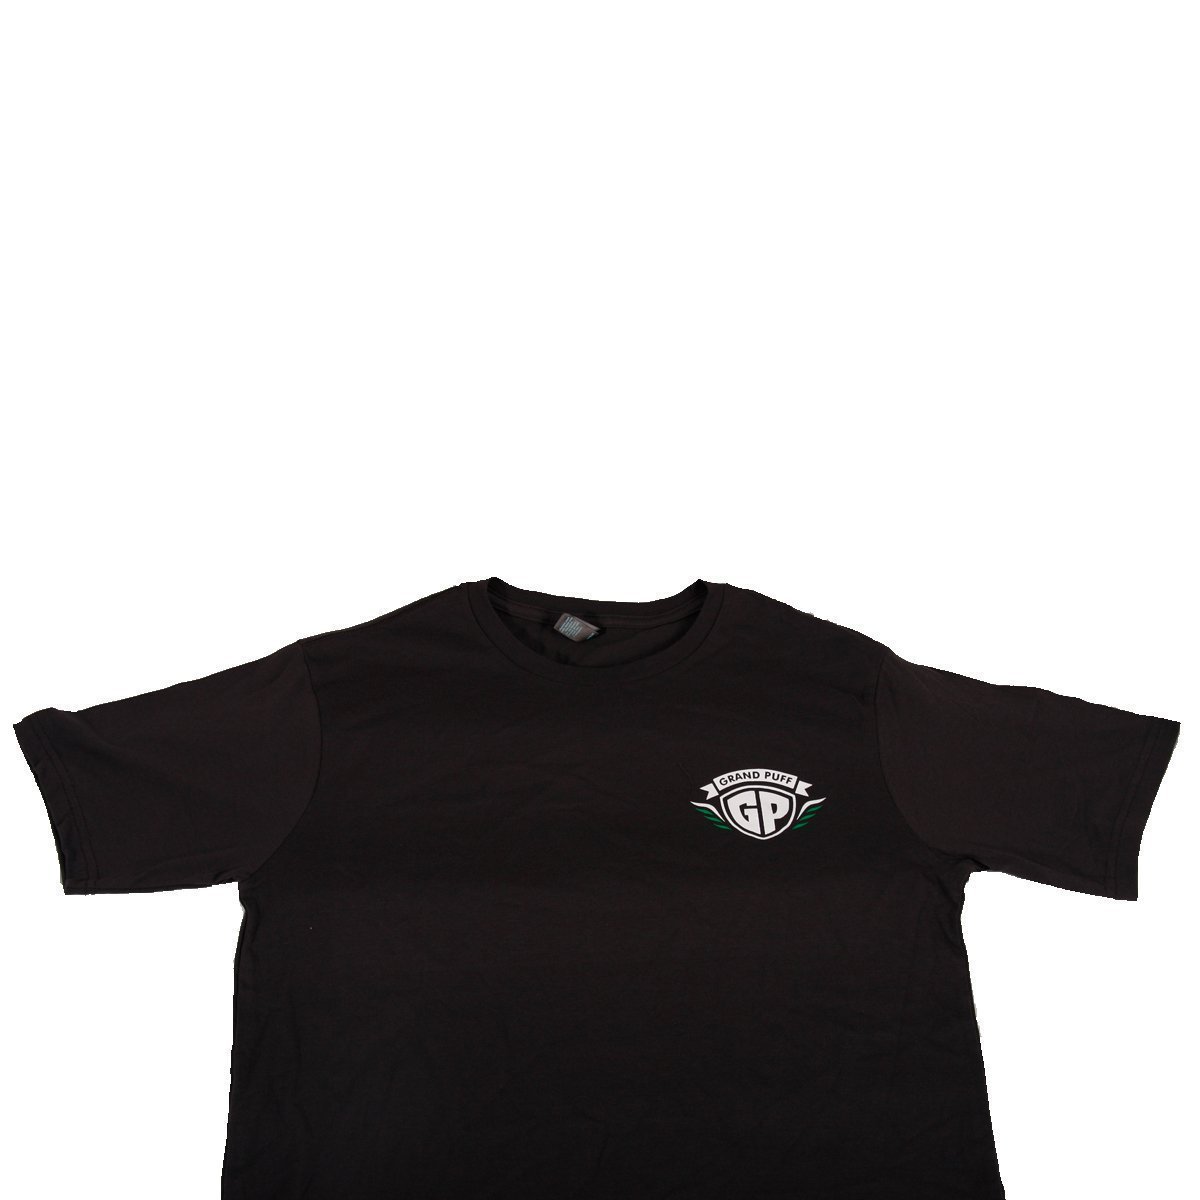 Grand Puff Sublimated T-Shirt